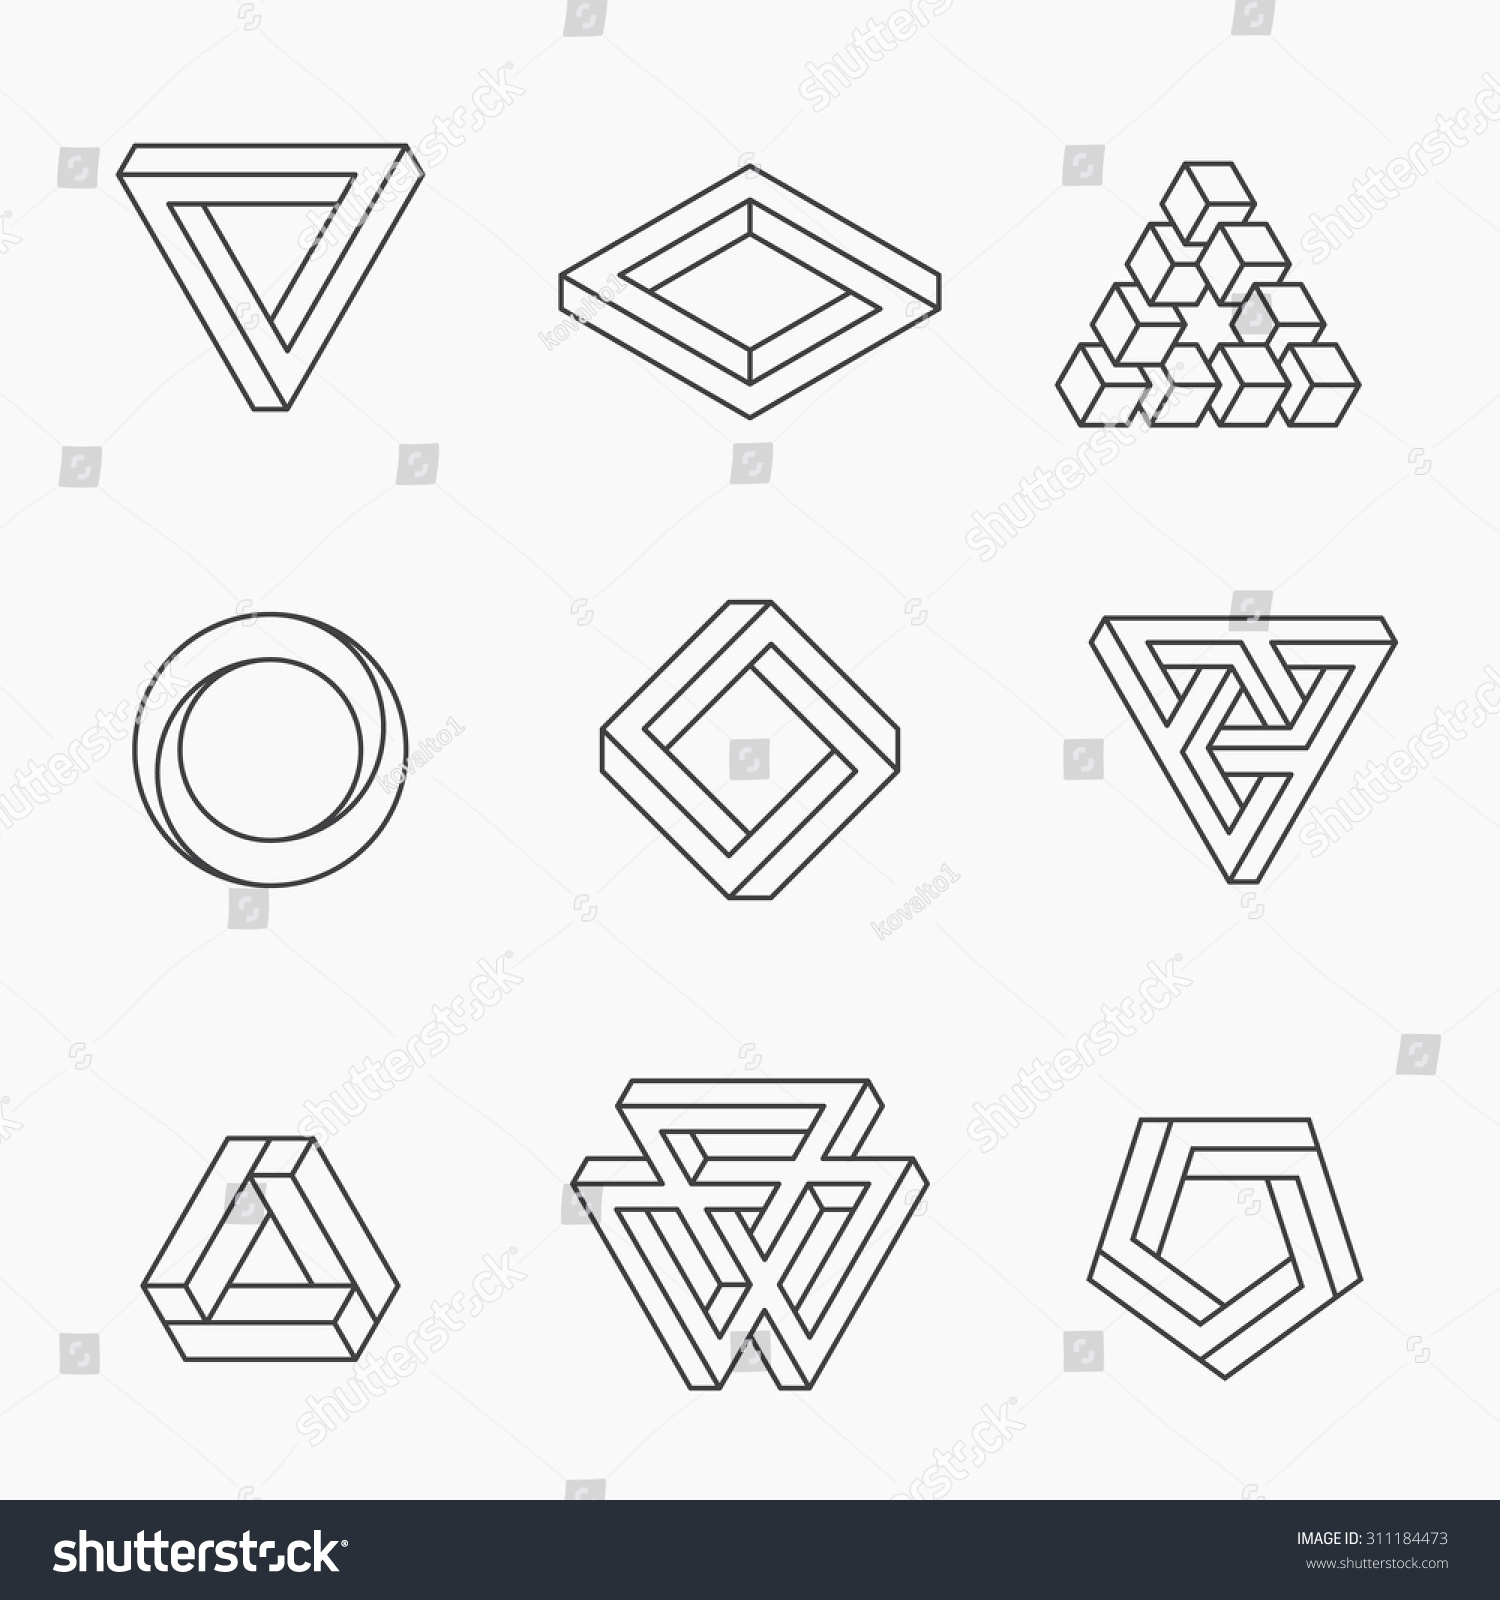 Set Impossible Shapes Vector Line Design Stock Vector 311184473 ...